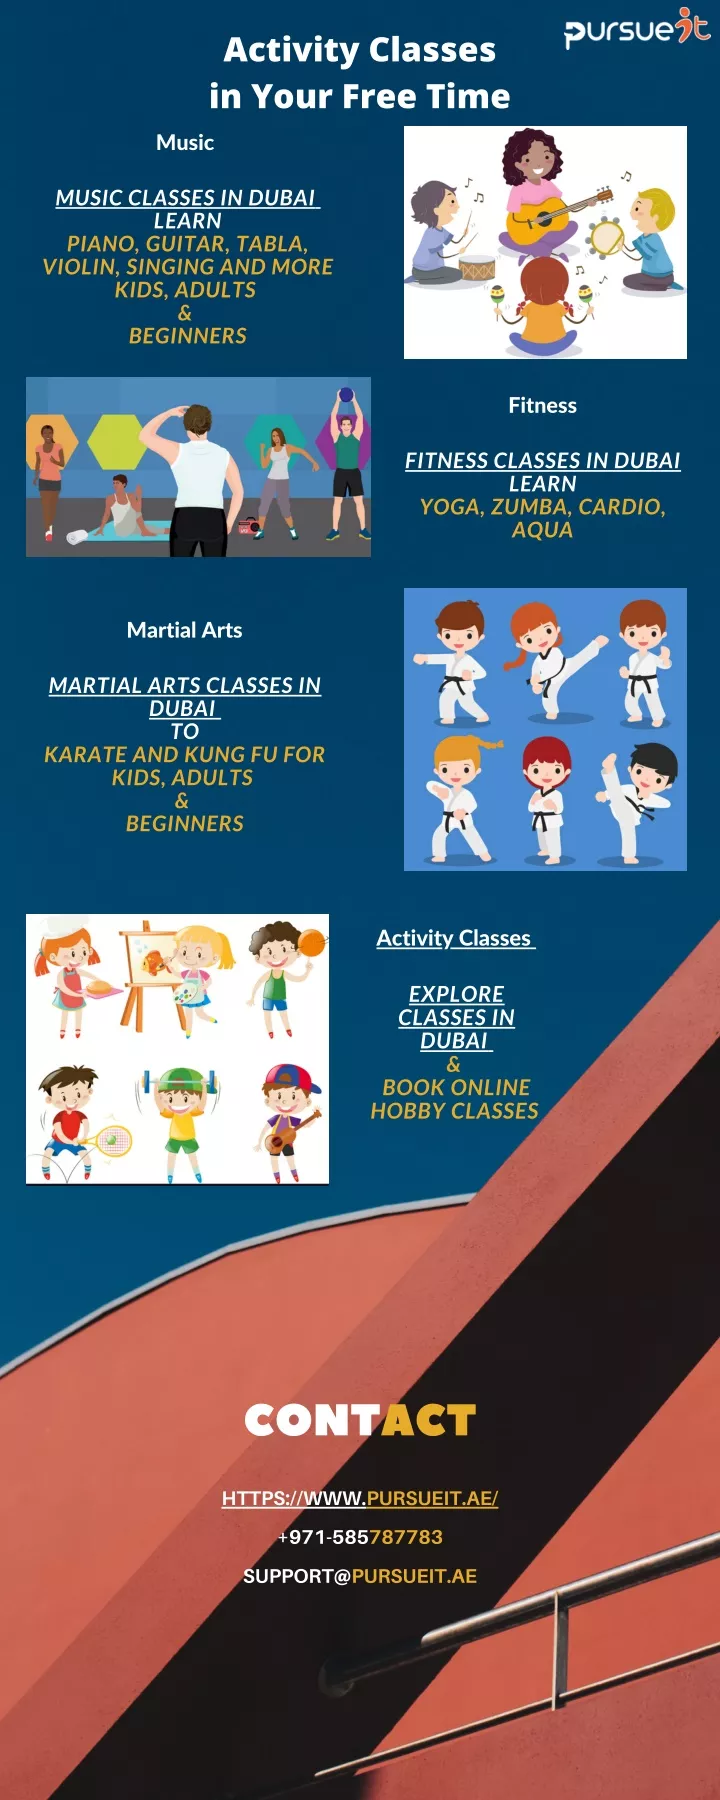 activity classes in your free time